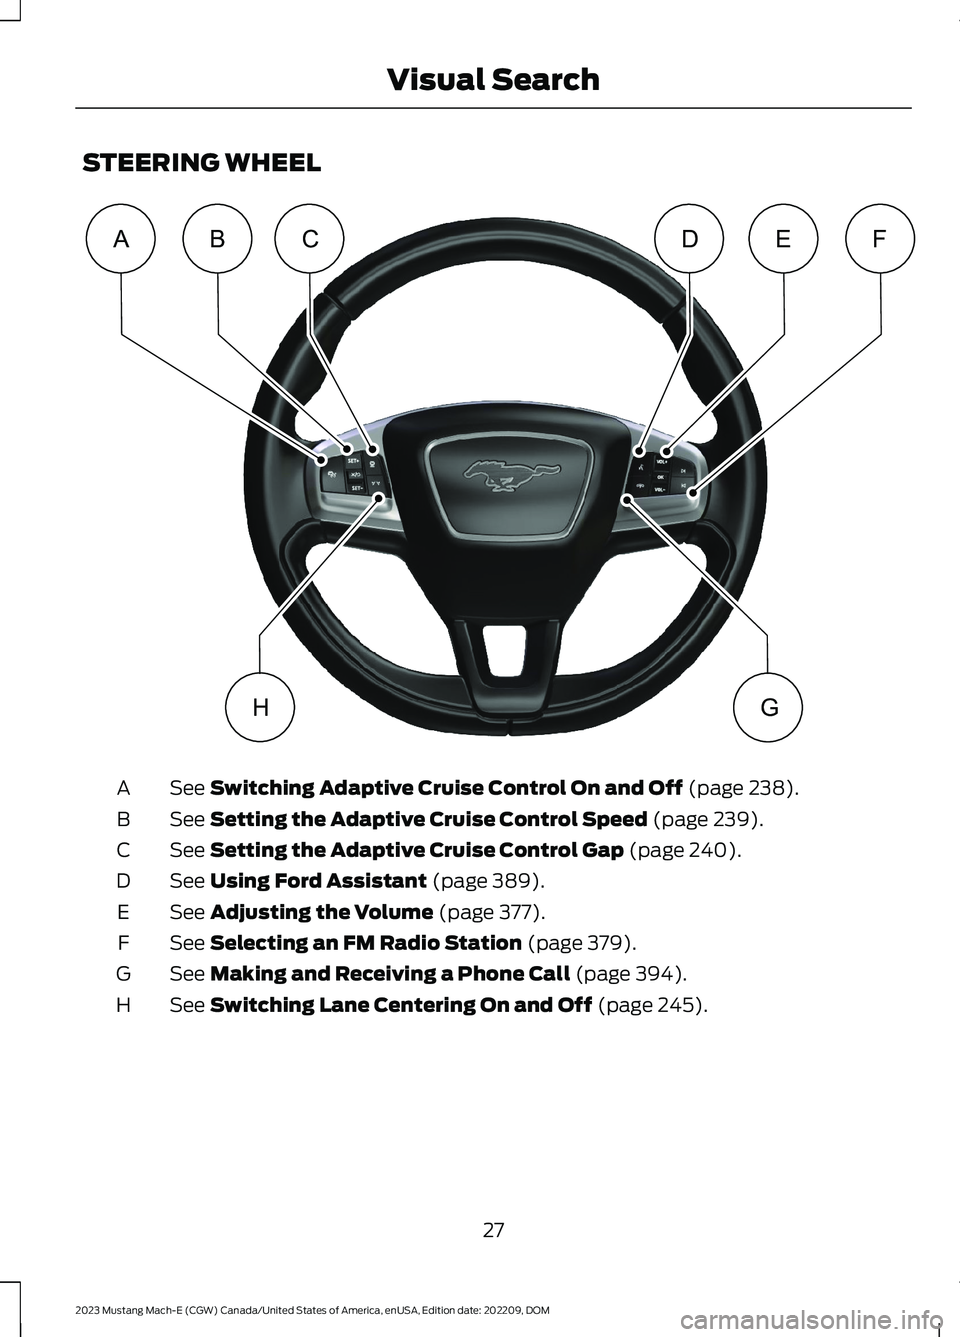 FORD MUSTANG MACH E 2023  Owners Manual STEERING WHEEL
See Switching Adaptive Cruise Control On and Off (page 238).A
See Setting the Adaptive Cruise Control Speed (page 239).B
See Setting the Adaptive Cruise Control Gap (page 240).C
See Usi